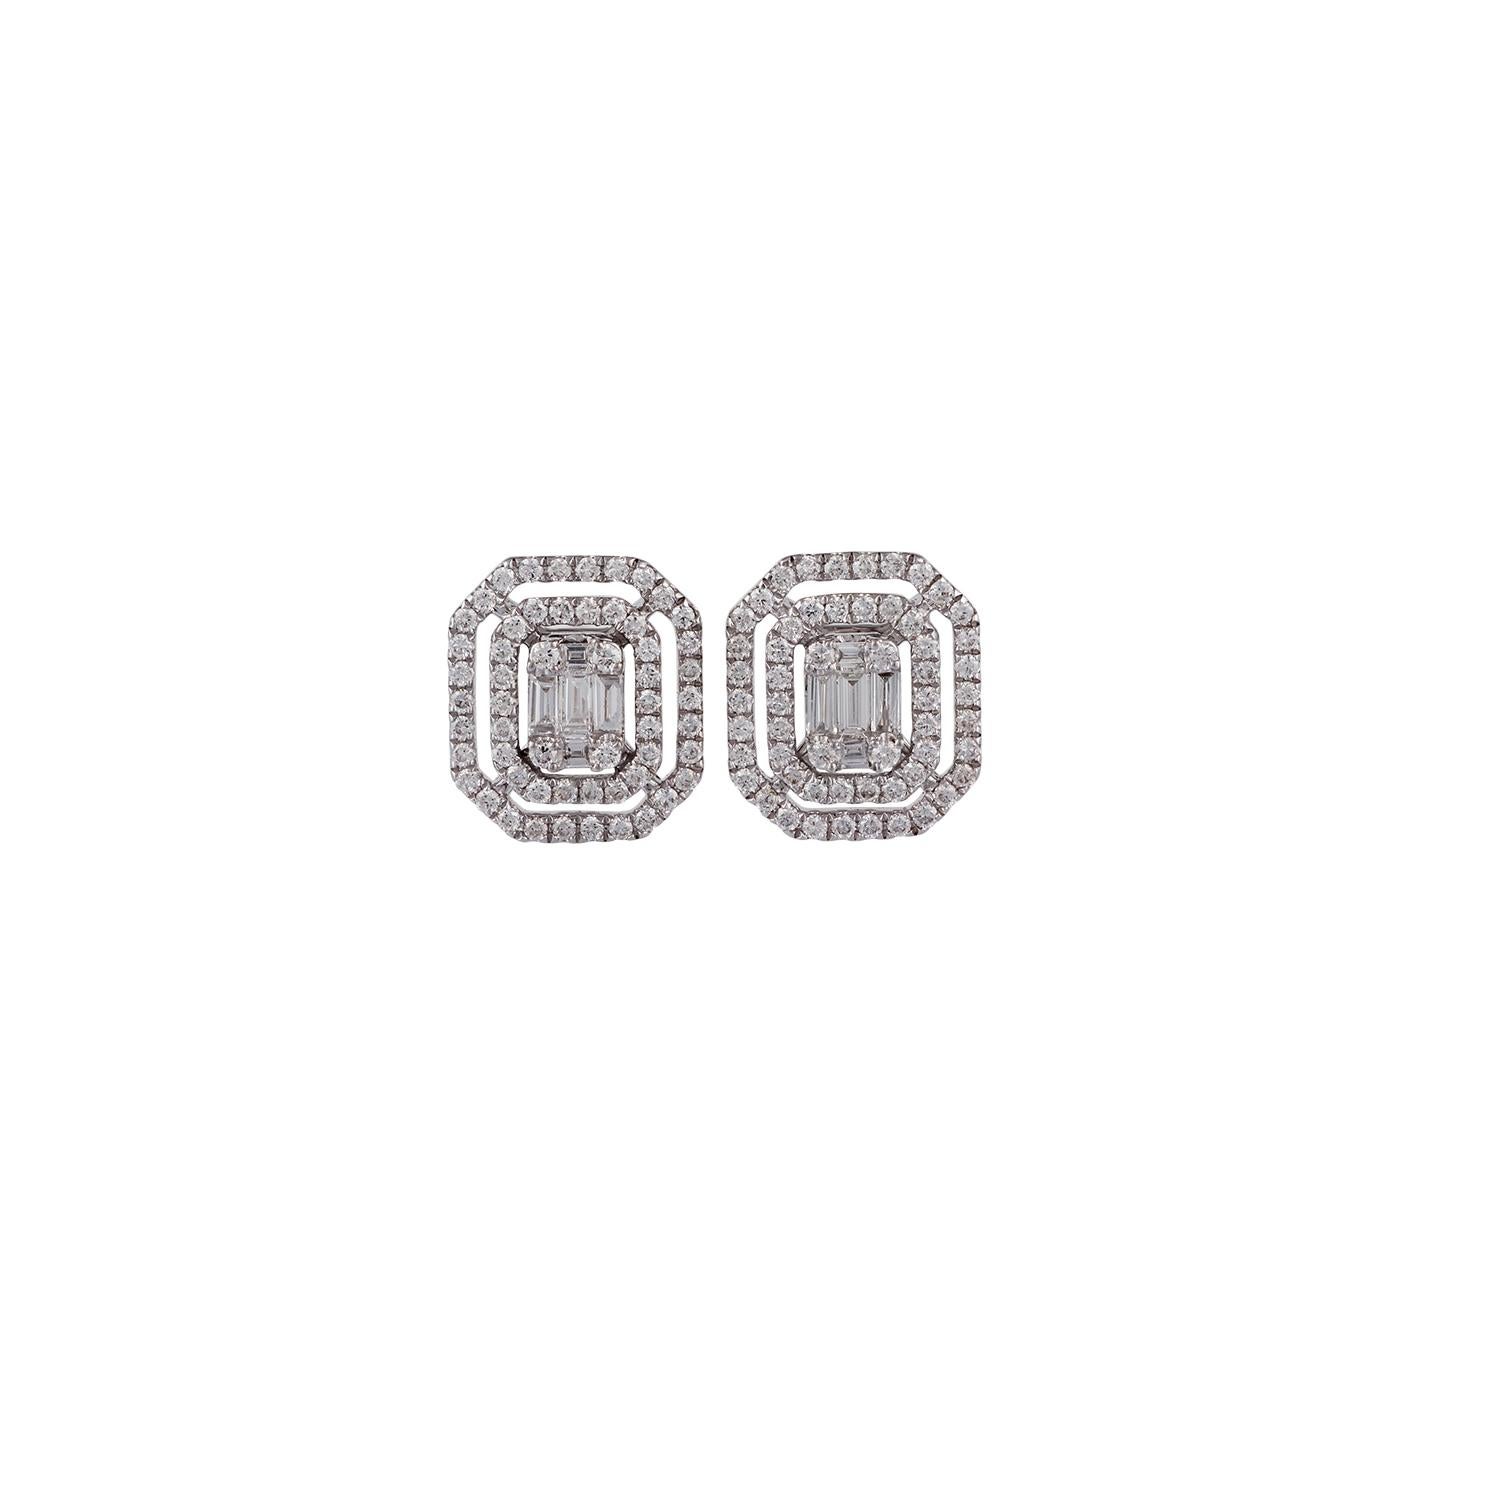 A fantastic pair of earrings features baguette and brilliant-cut round shaped diamonds set in an illusion setting to make it look like a larger emerald cut diamond, in these earrings the combined weight of diamonds is 0.85 carat, they are studded in